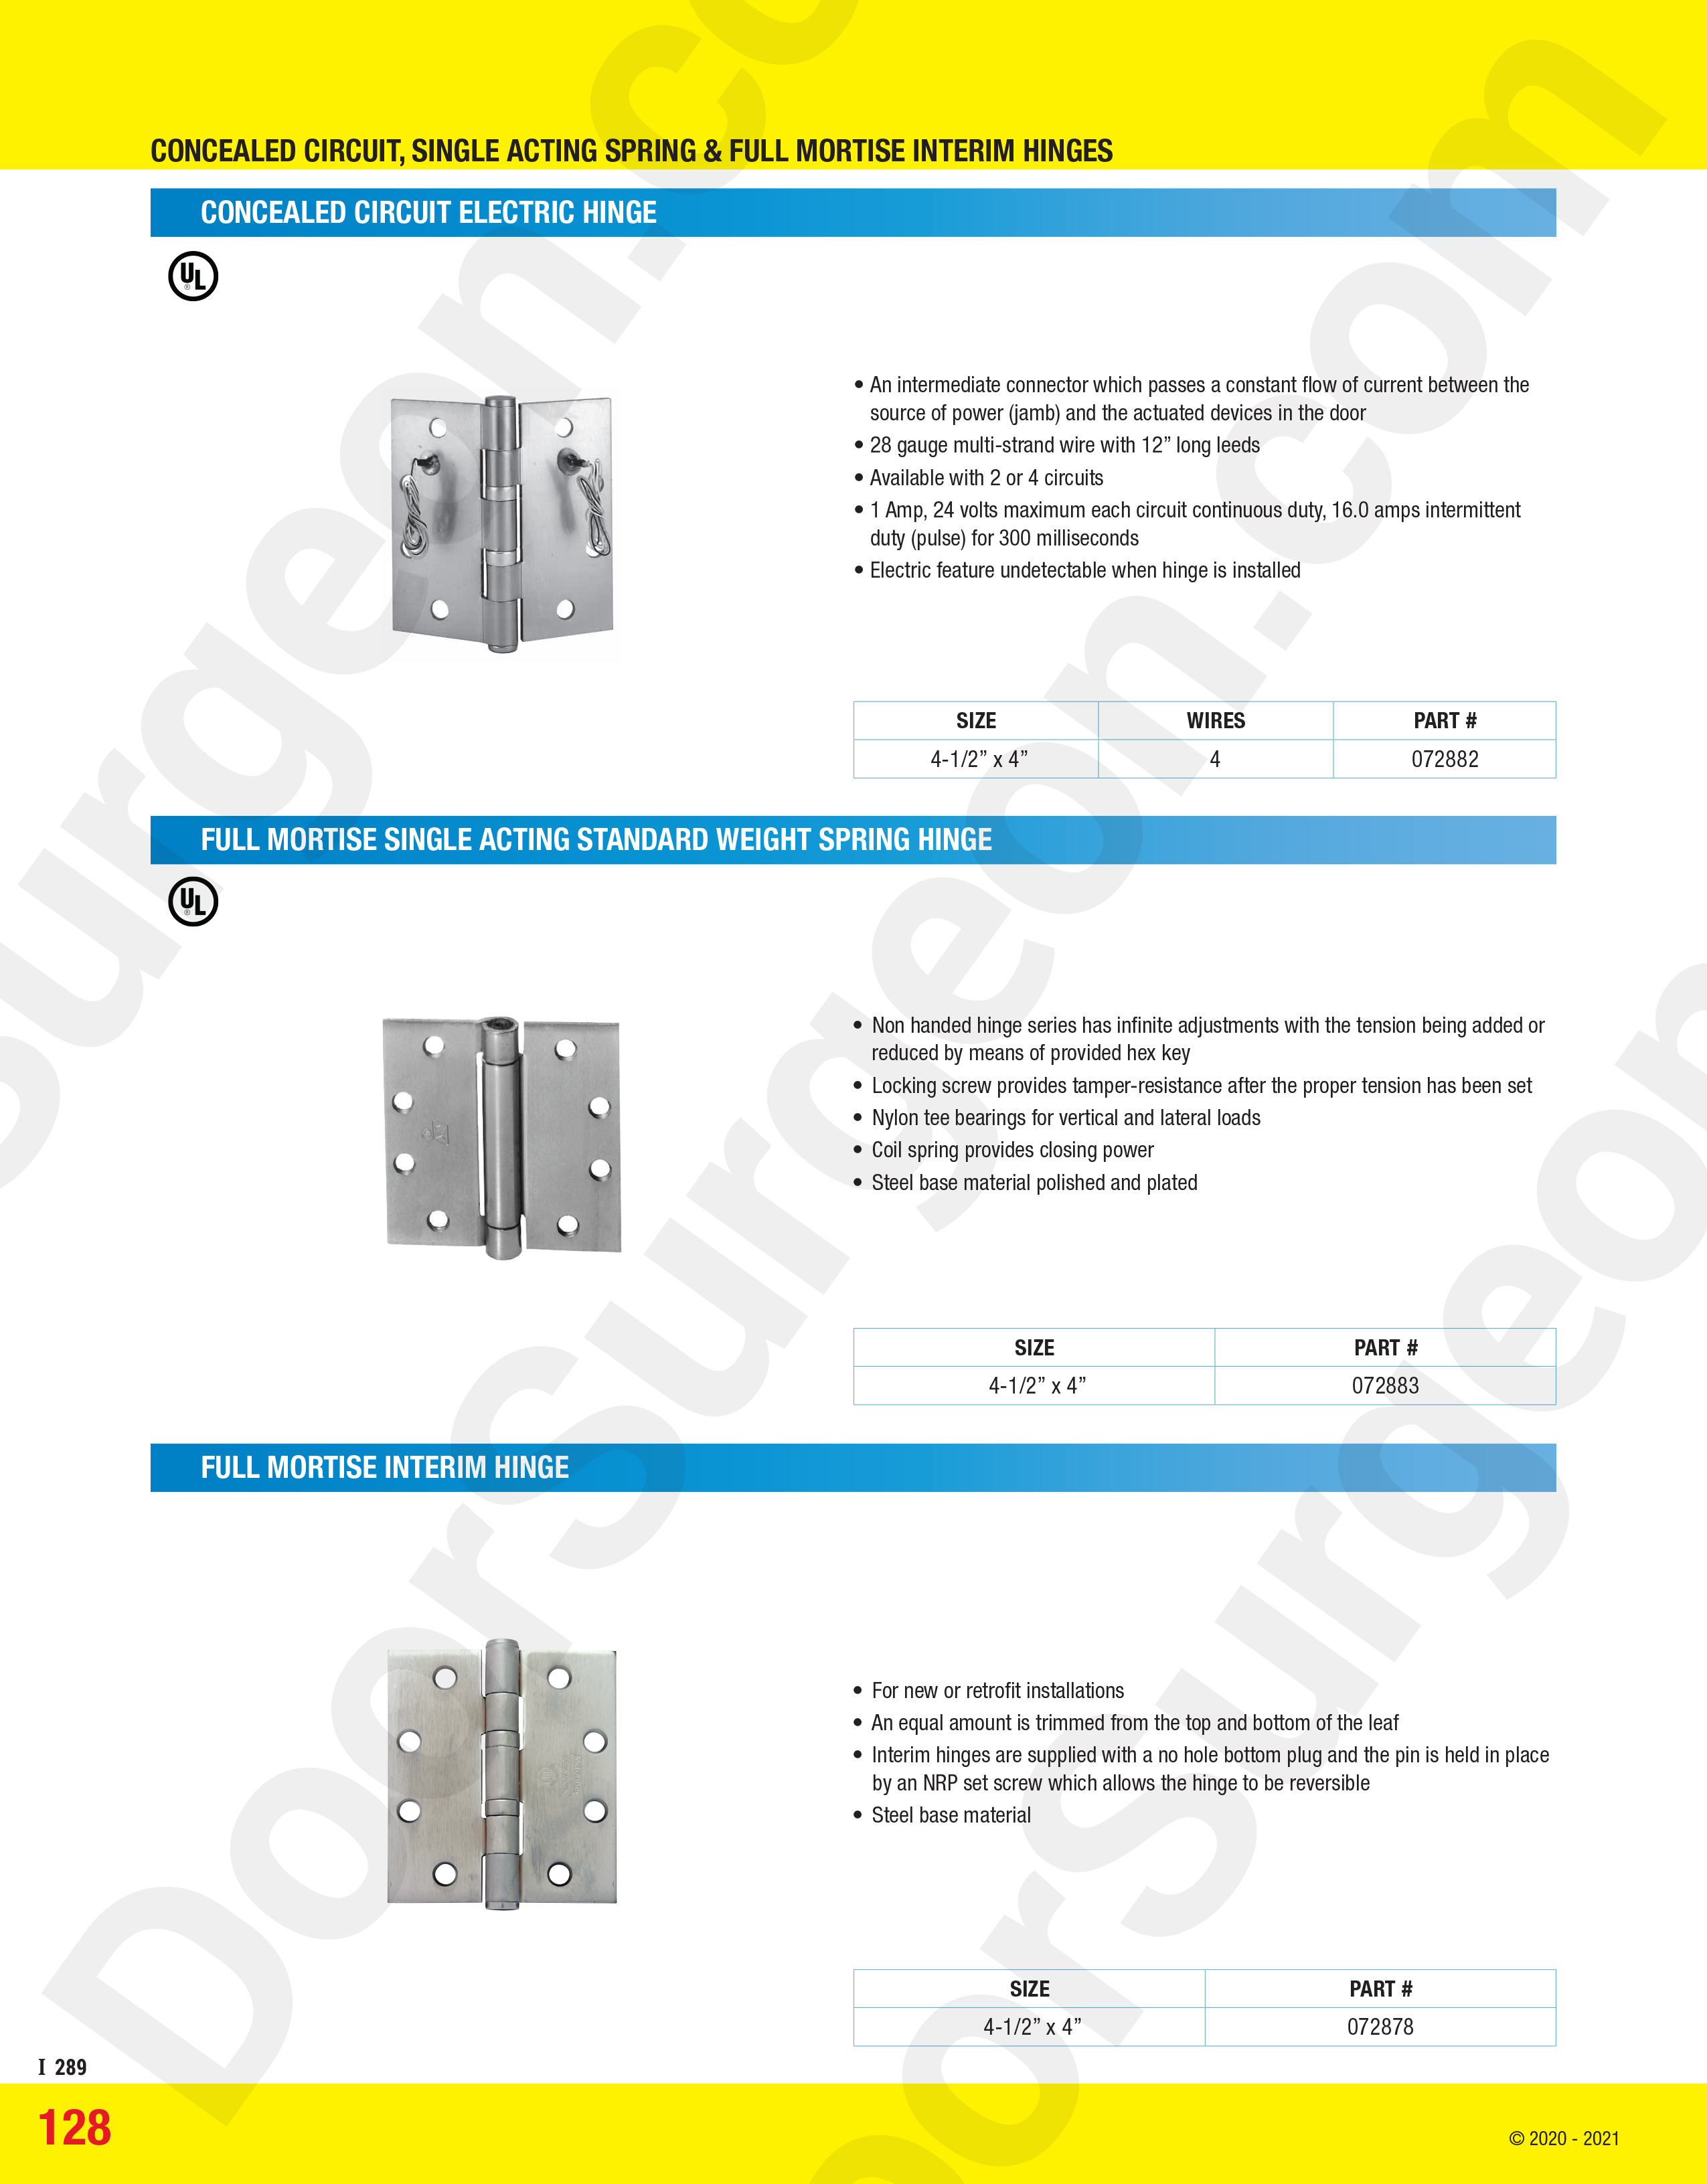 Concealed circuit single acting spring and full mortise interim hinges.